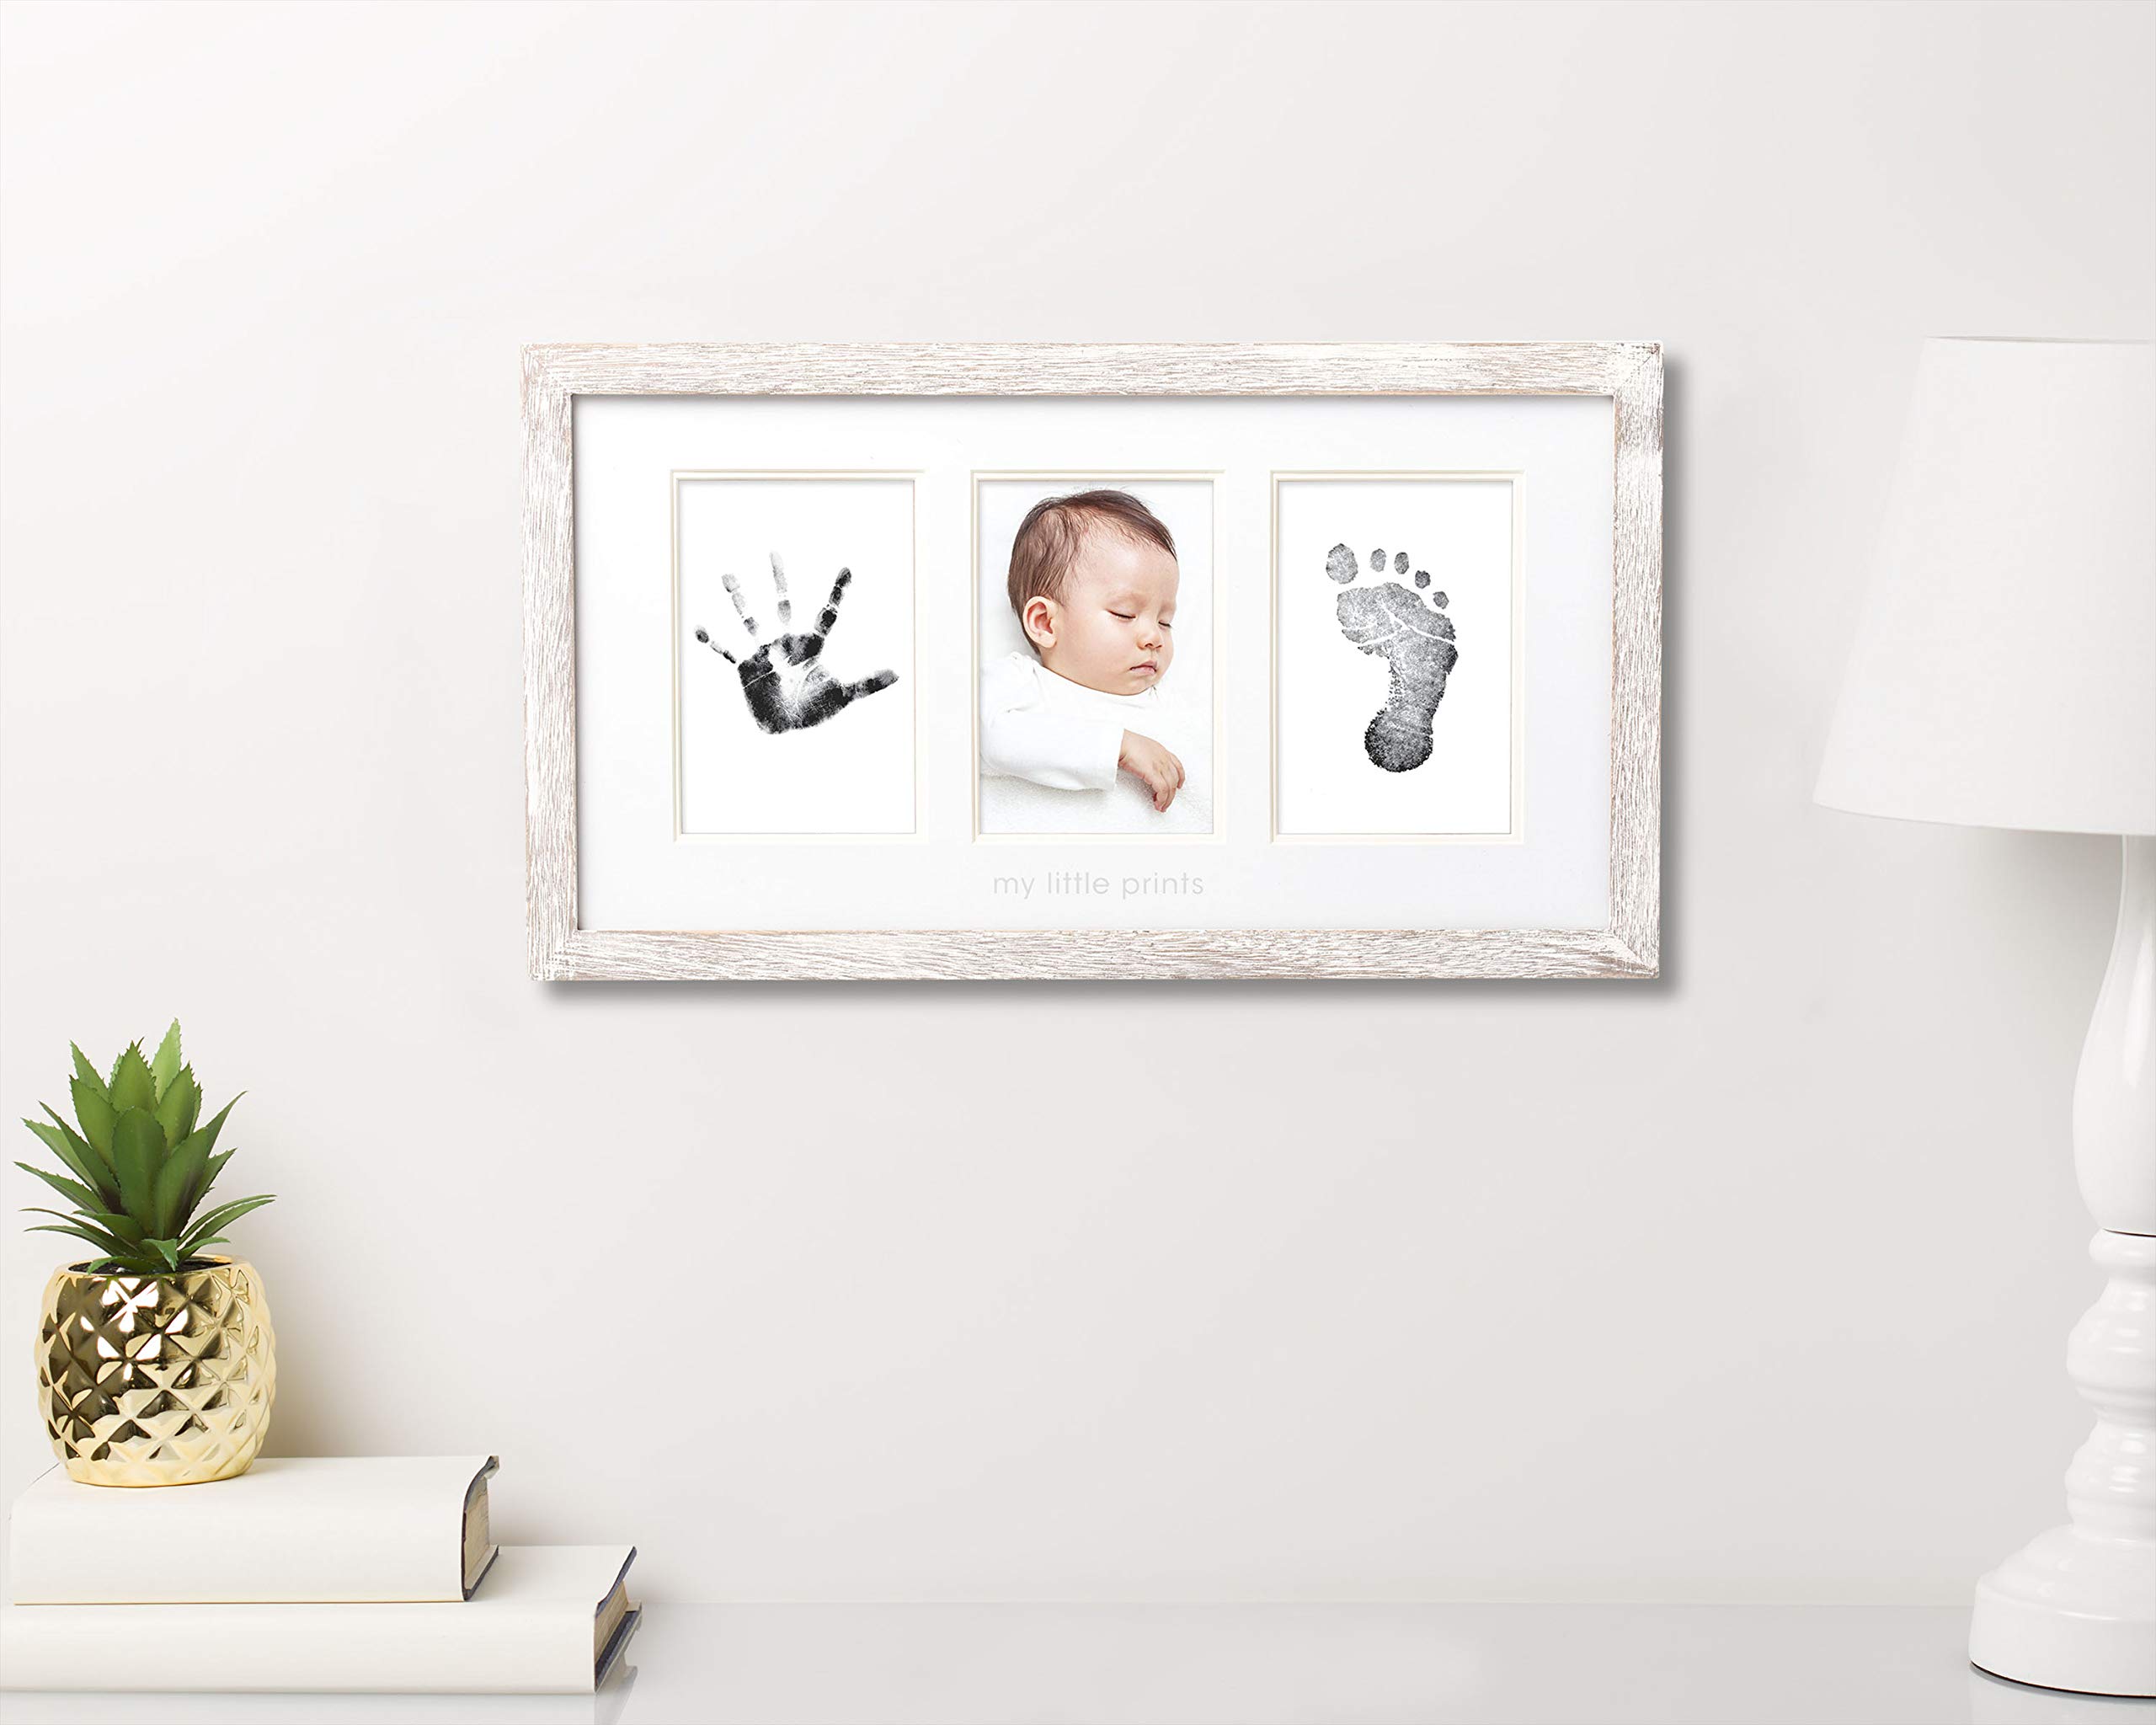 Pearhead My First Year Photo Moments Baby Picture Frame, Baby’s First Year Photo Frame, Newborn Handprint And Footprint Keepsake, Gender-Neutral Baby Milestone Nursery Décor, Distressed Wood